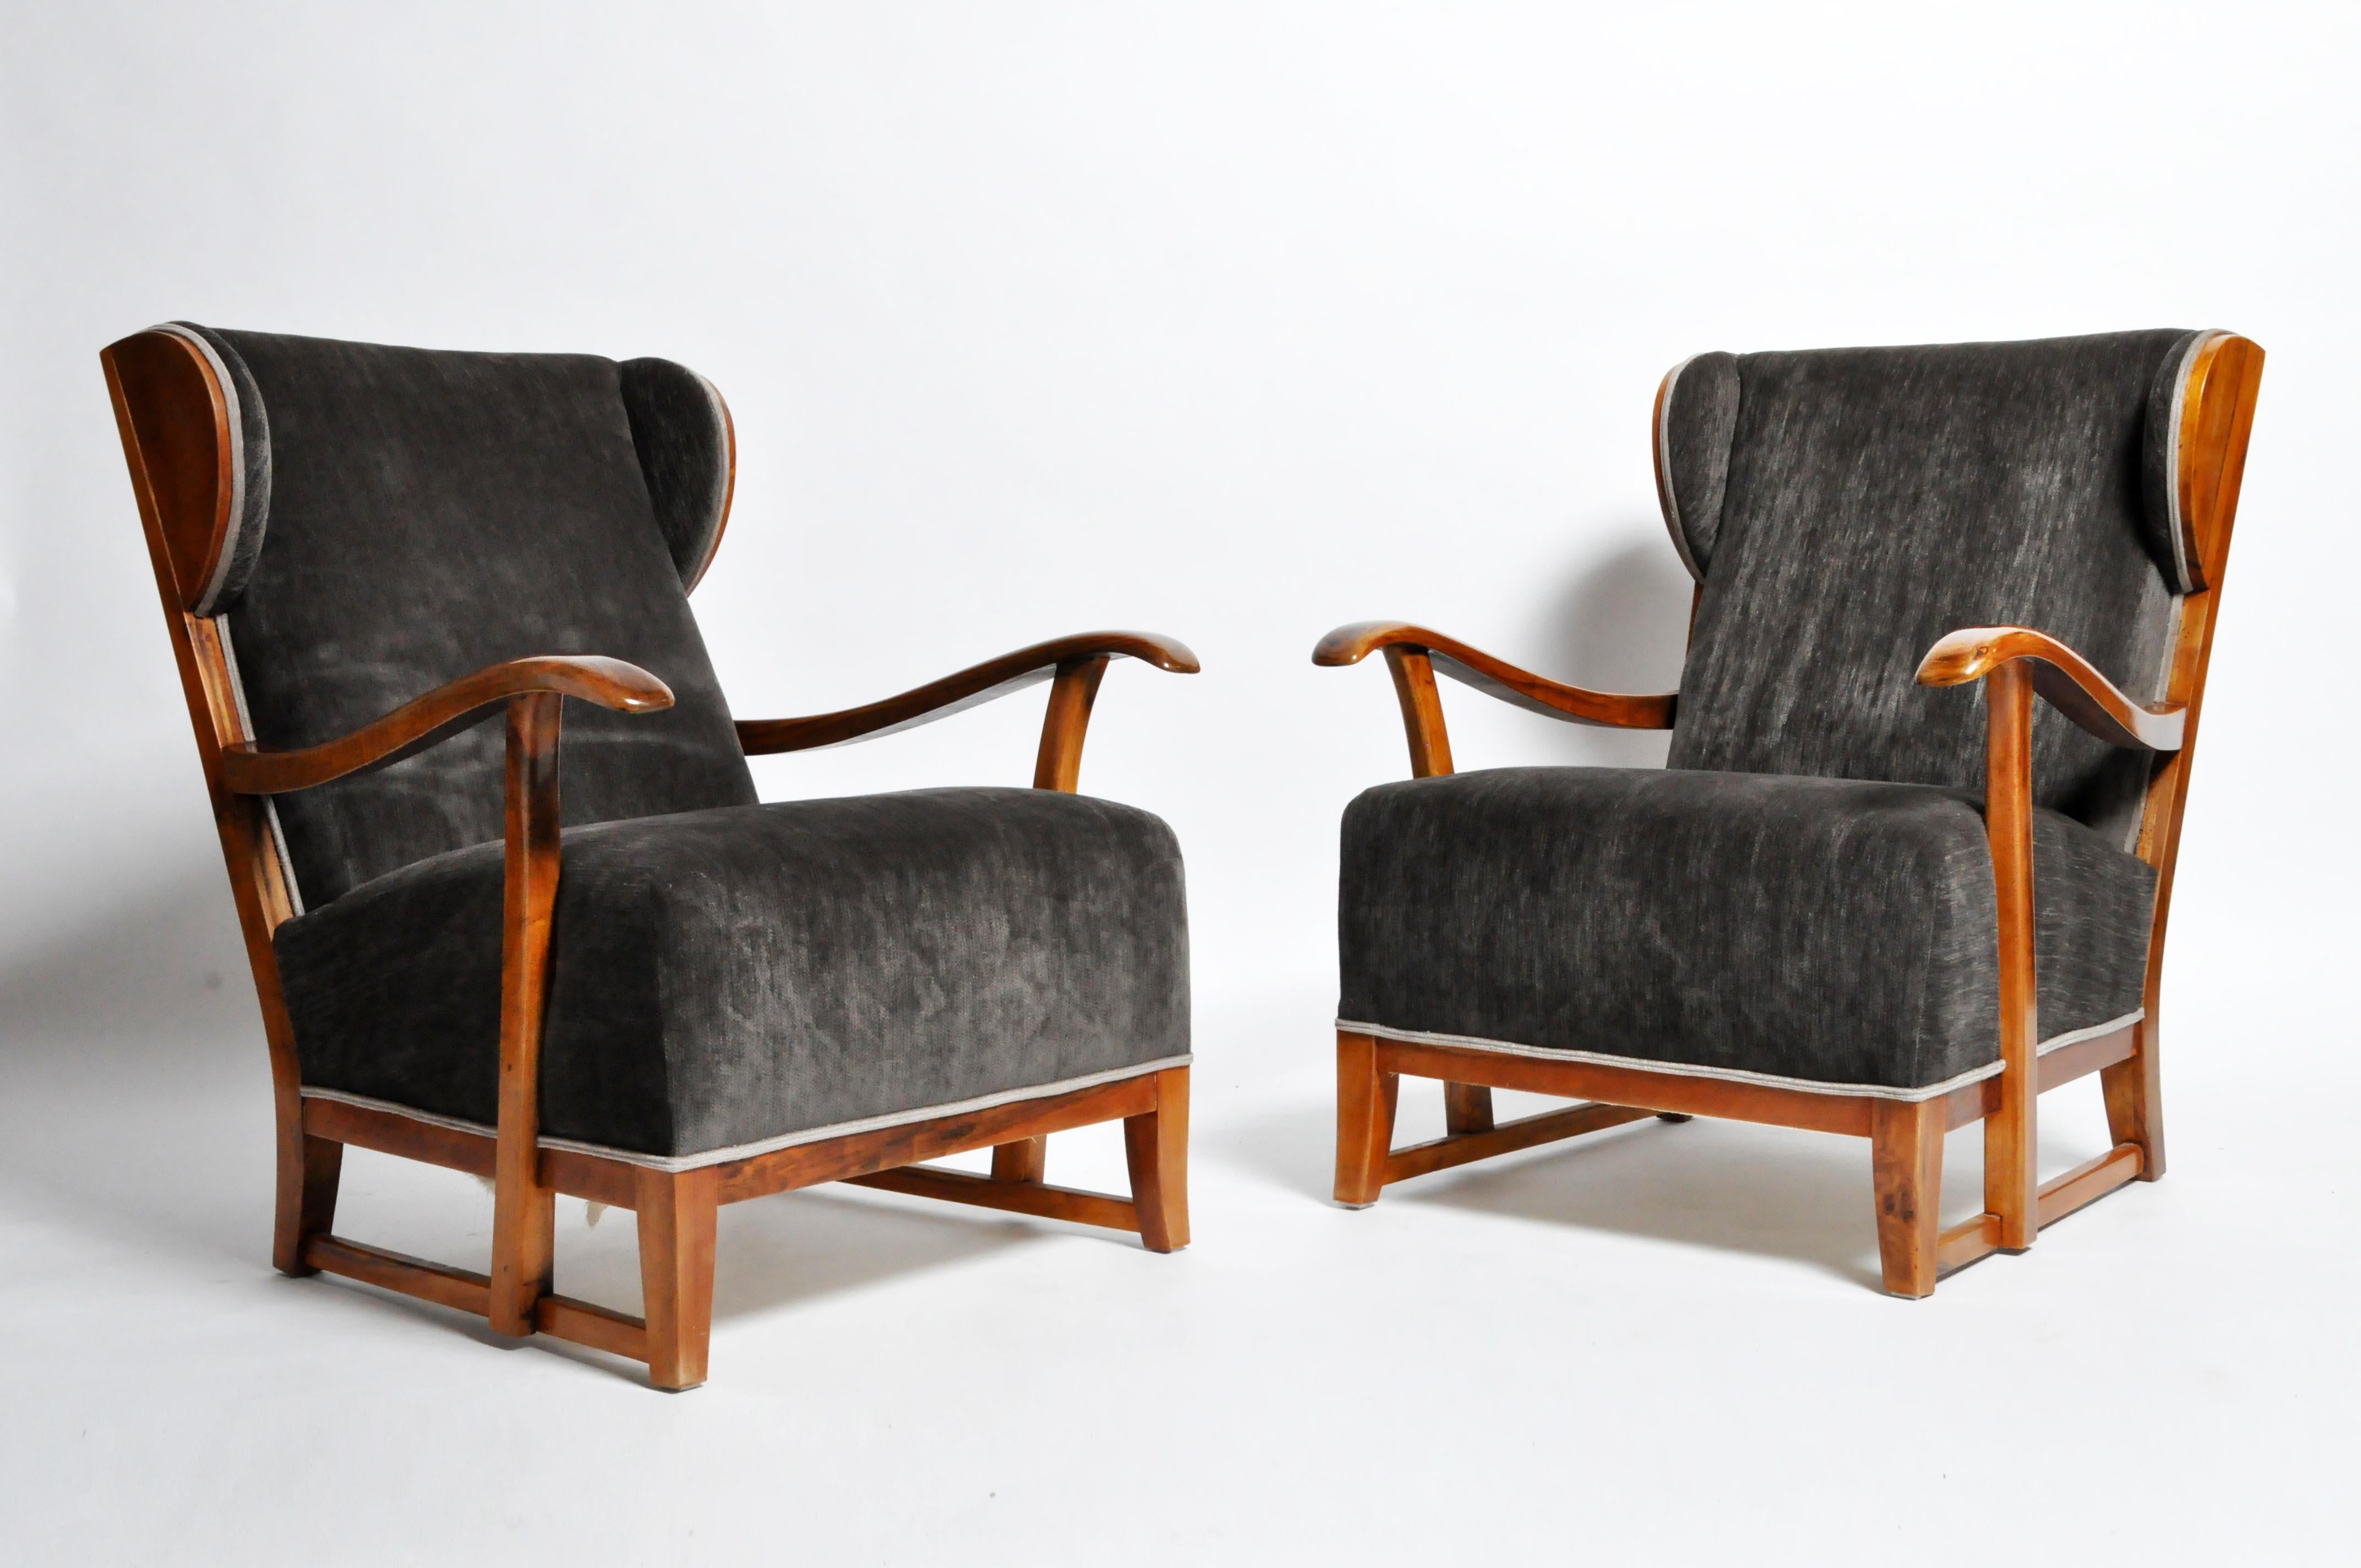 This handsome pair of armchairs are from Hungary and made from solid walnut and new upholstery, circa 1960. Strong and sturdy; ready for daily use.